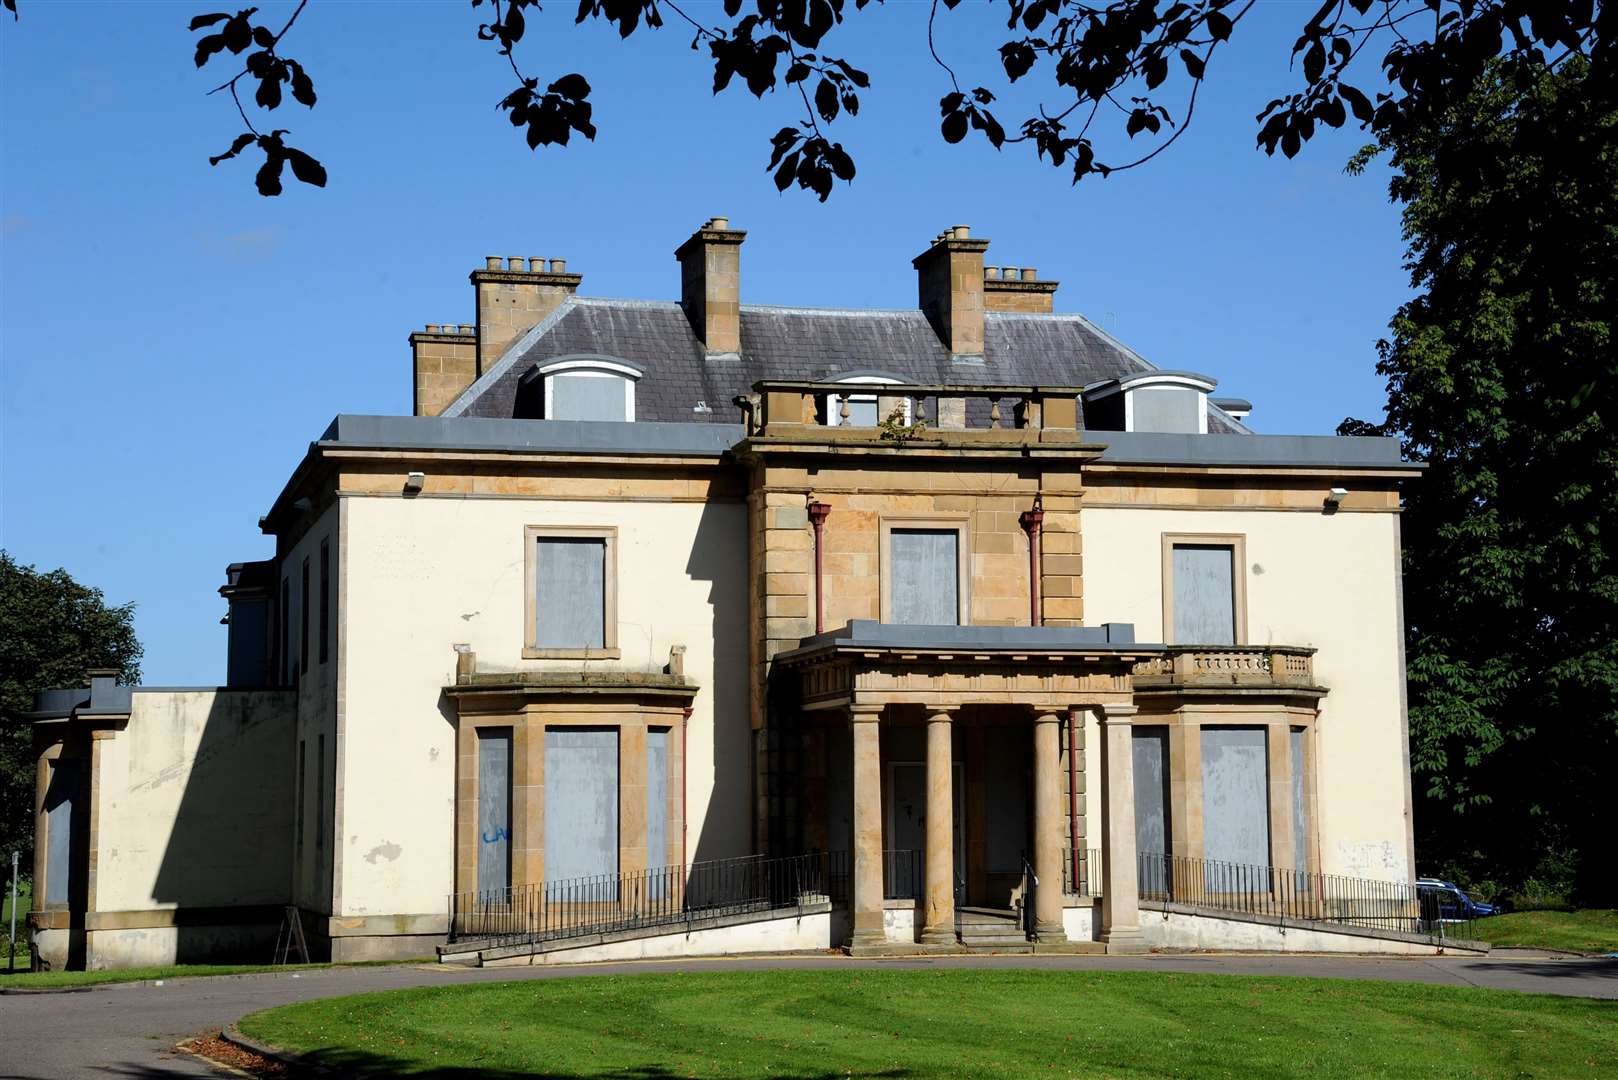 Grant Lodge at Cooper Park may be renovated as part of the Cultural Quarter plans for Elgin.